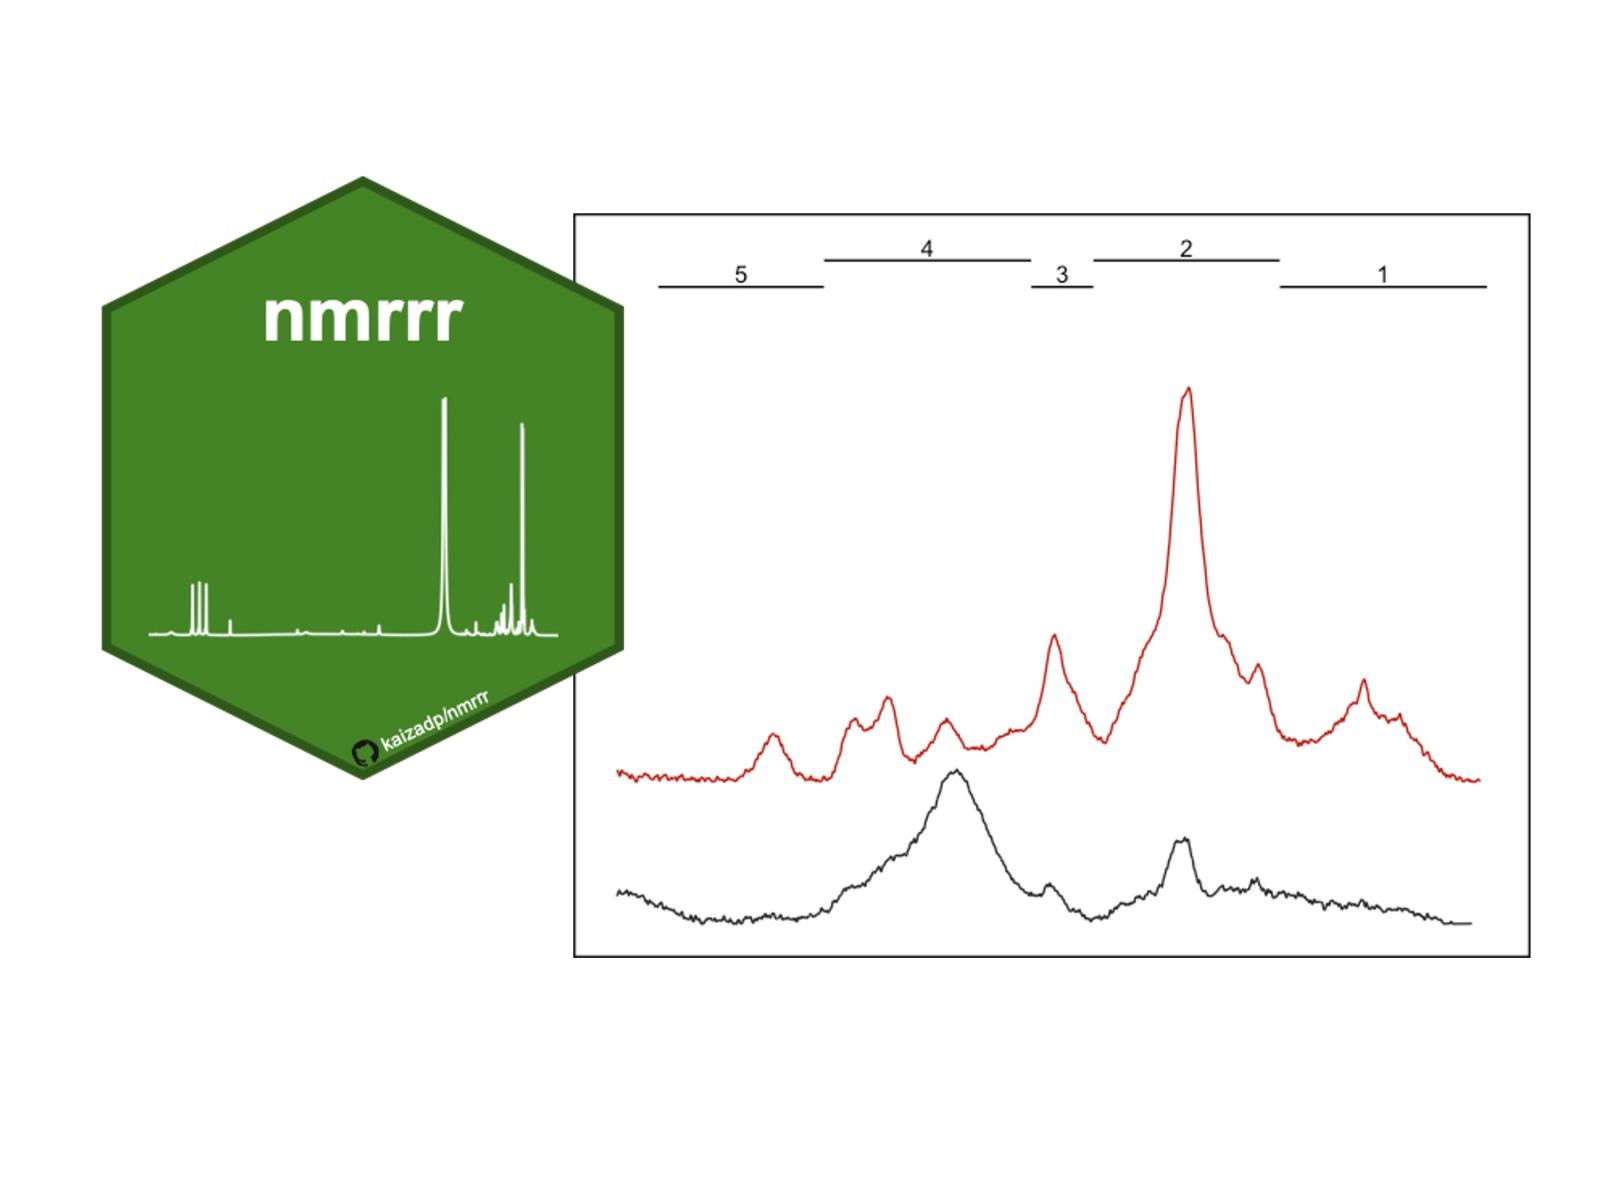 The logo of the nmrrr package for R with some sample output showing processed NMR spectra.